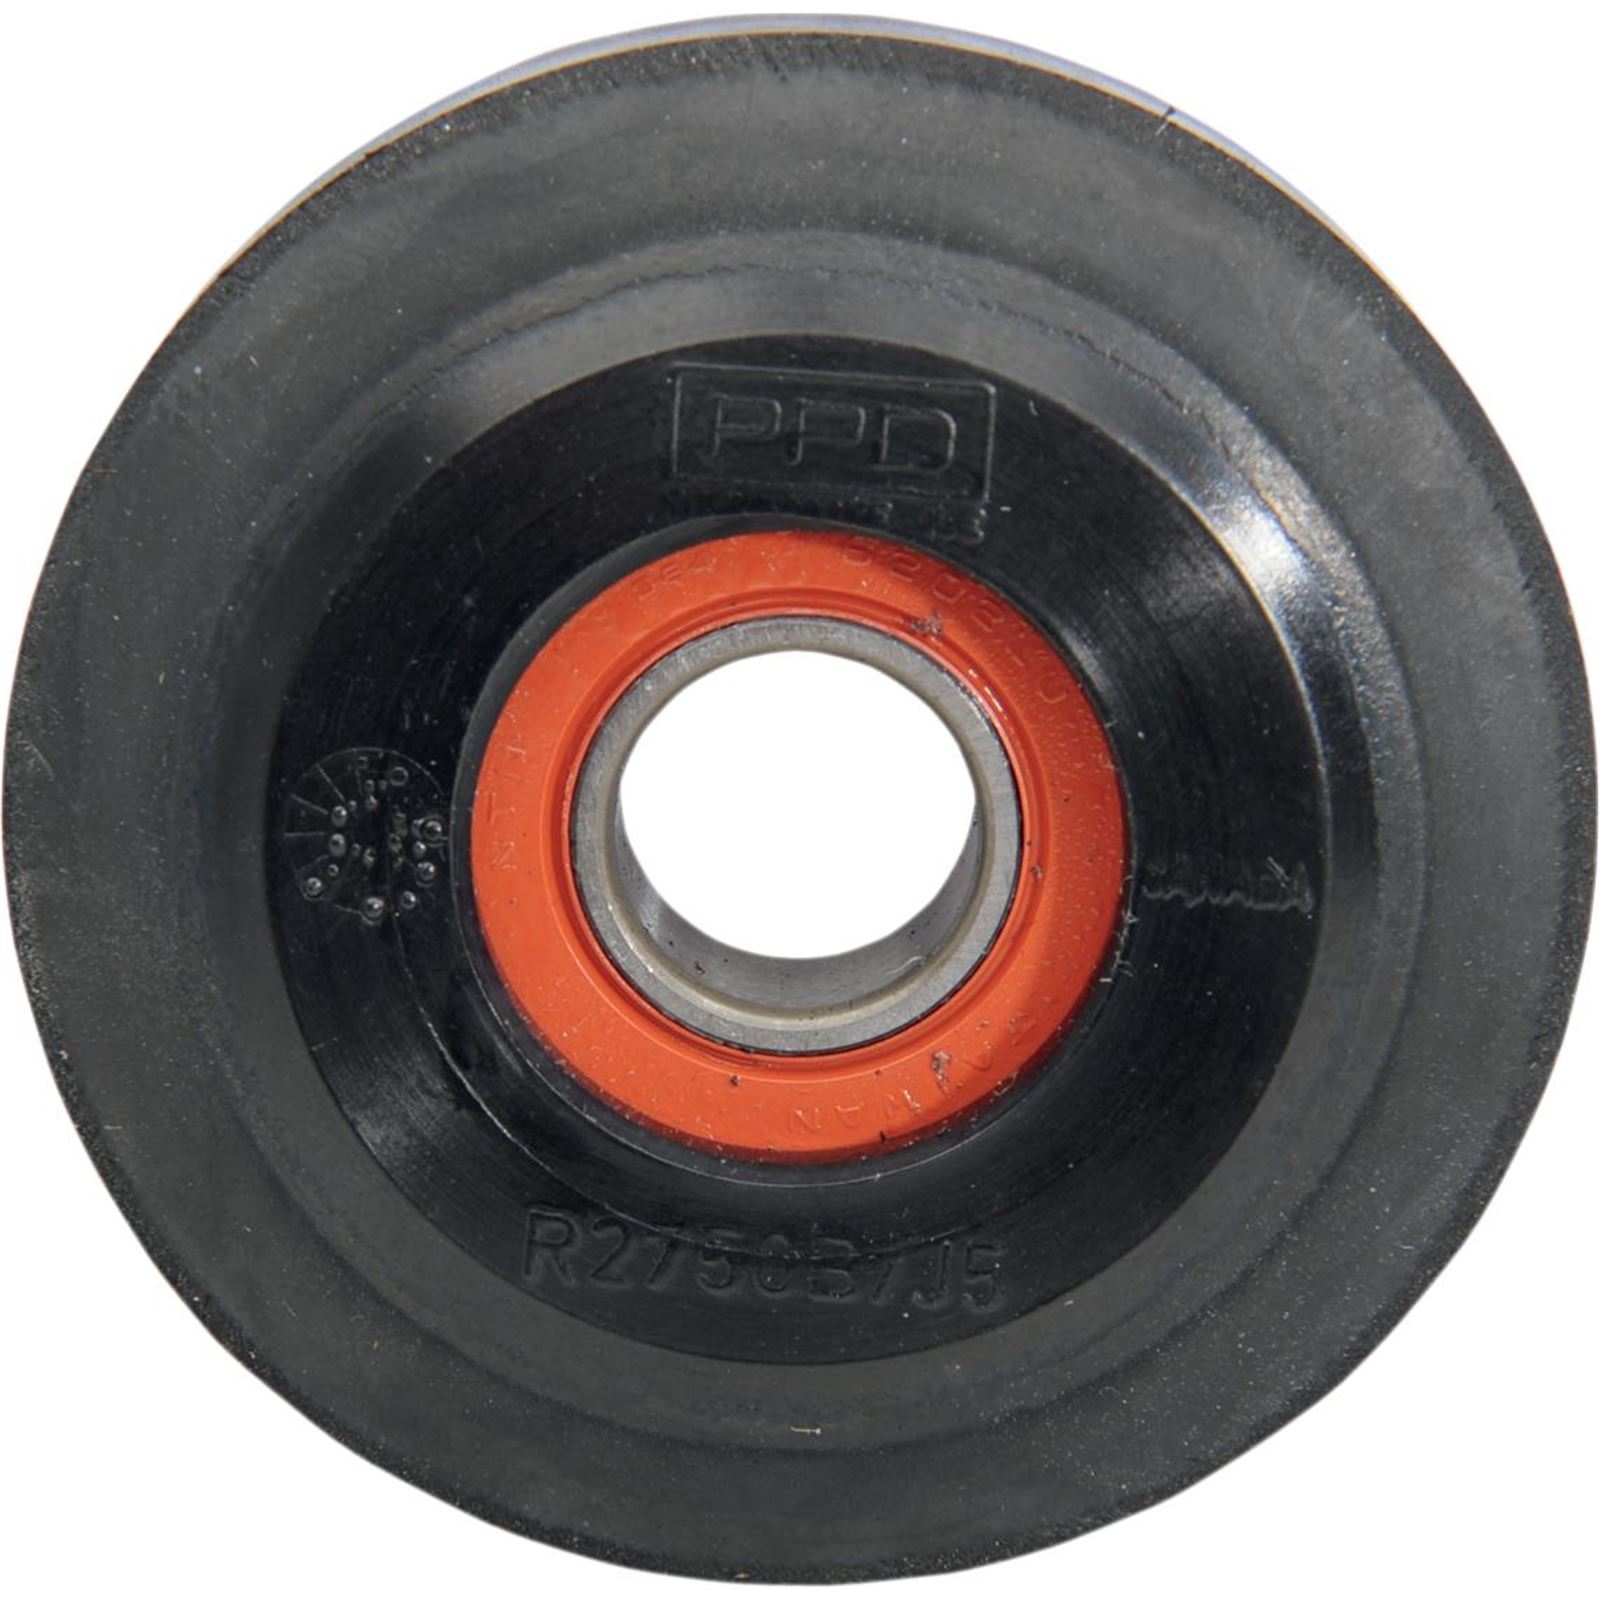 Parts Unlimited Idler Wheel with Bearing - Standard 2.75" Black